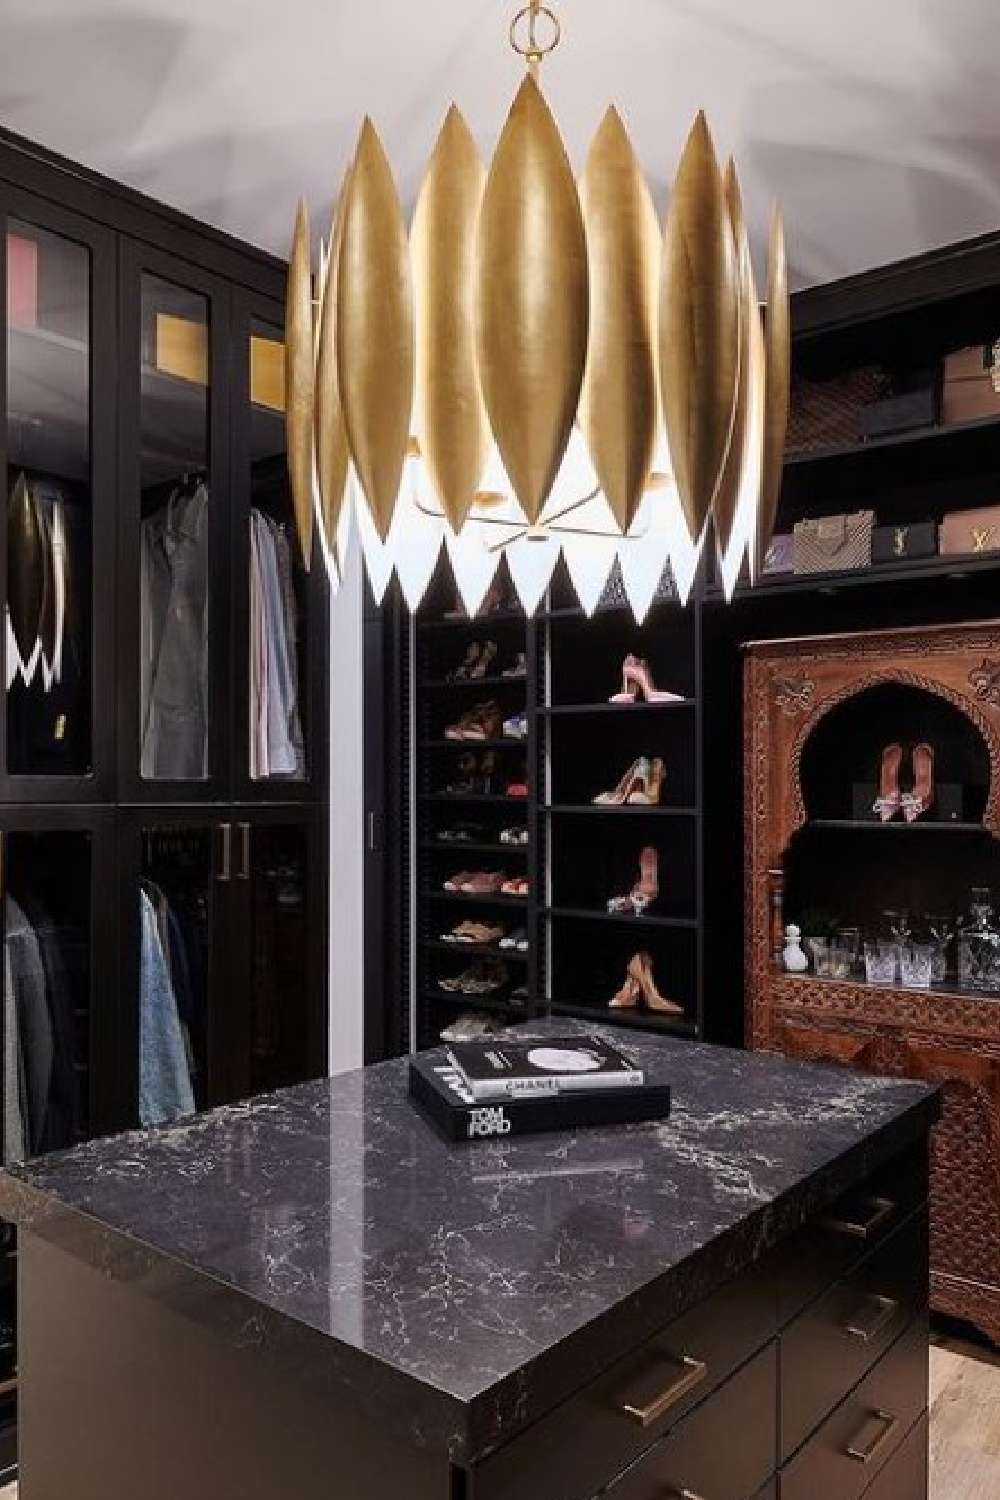 Bespoke fantasy closet in black by Alison Victoria - photo by Anthony Tahlier.